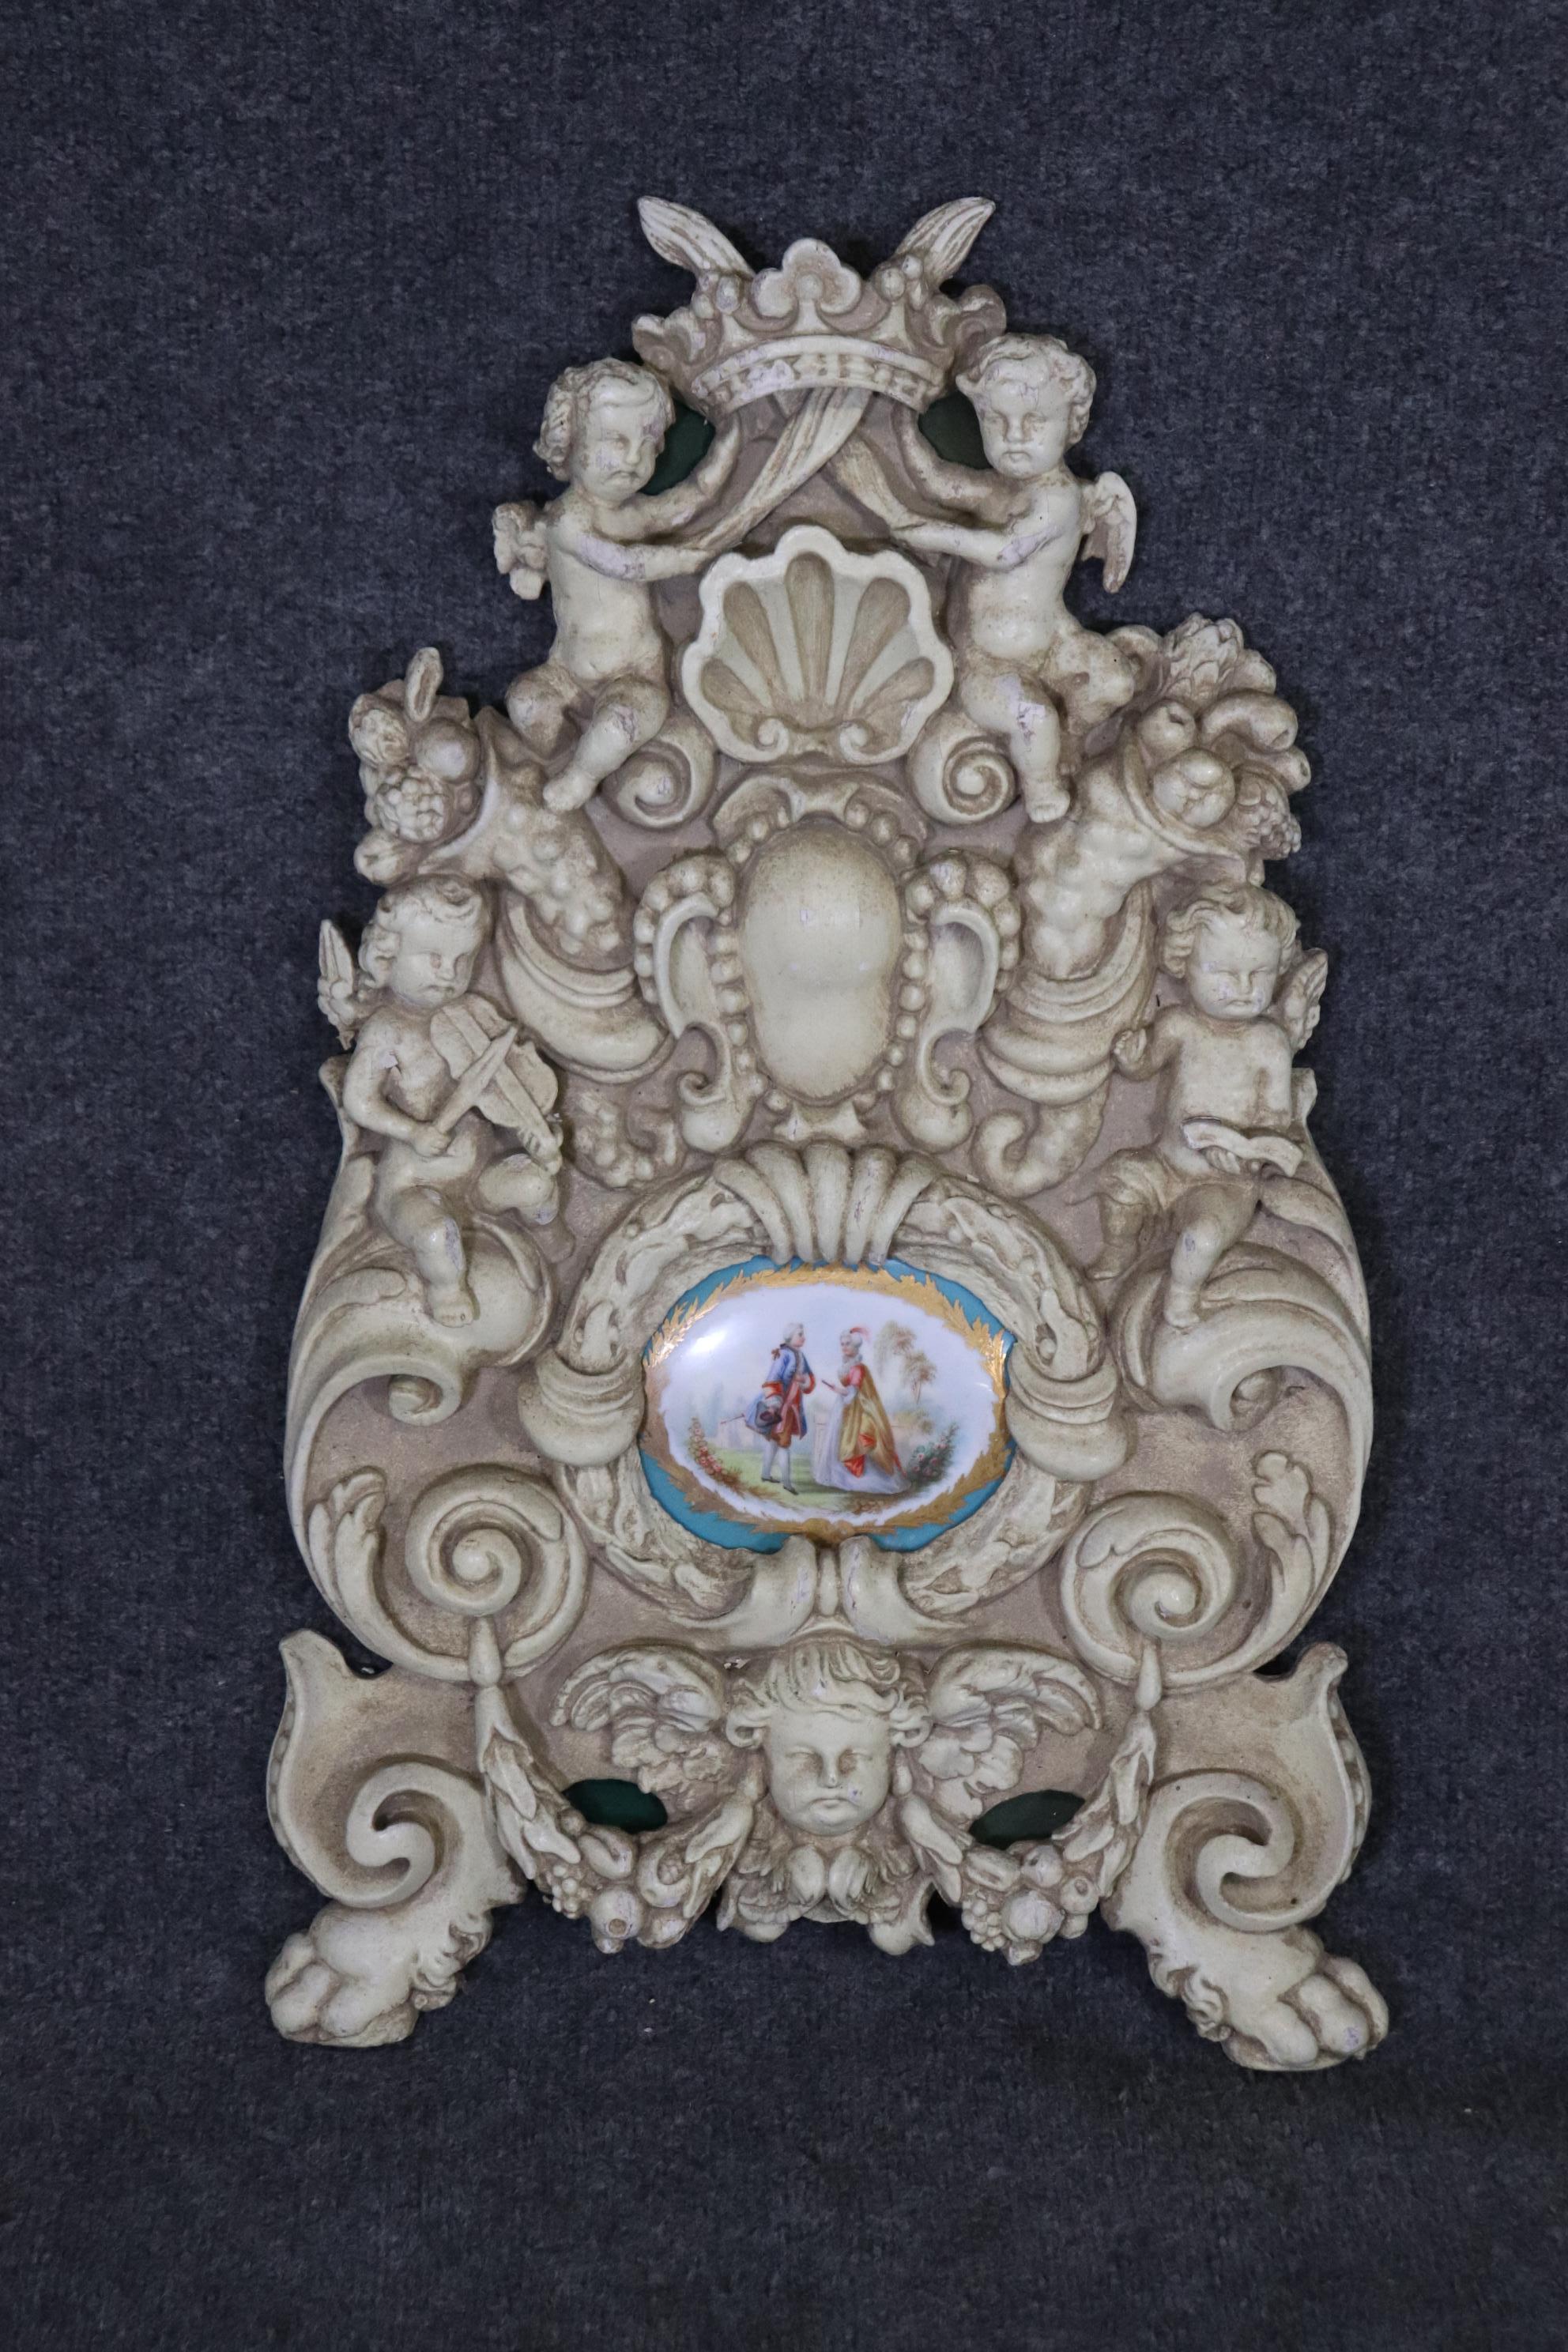 Dimensions- H: 26in W: 15 3/4in D: 2in
This Pair French Figural Carved Wall Decorations With Sevres Style Plaques are made of the highest quality and have a stunning look! This pair is made of wood and has a swedish finish to the carved figural